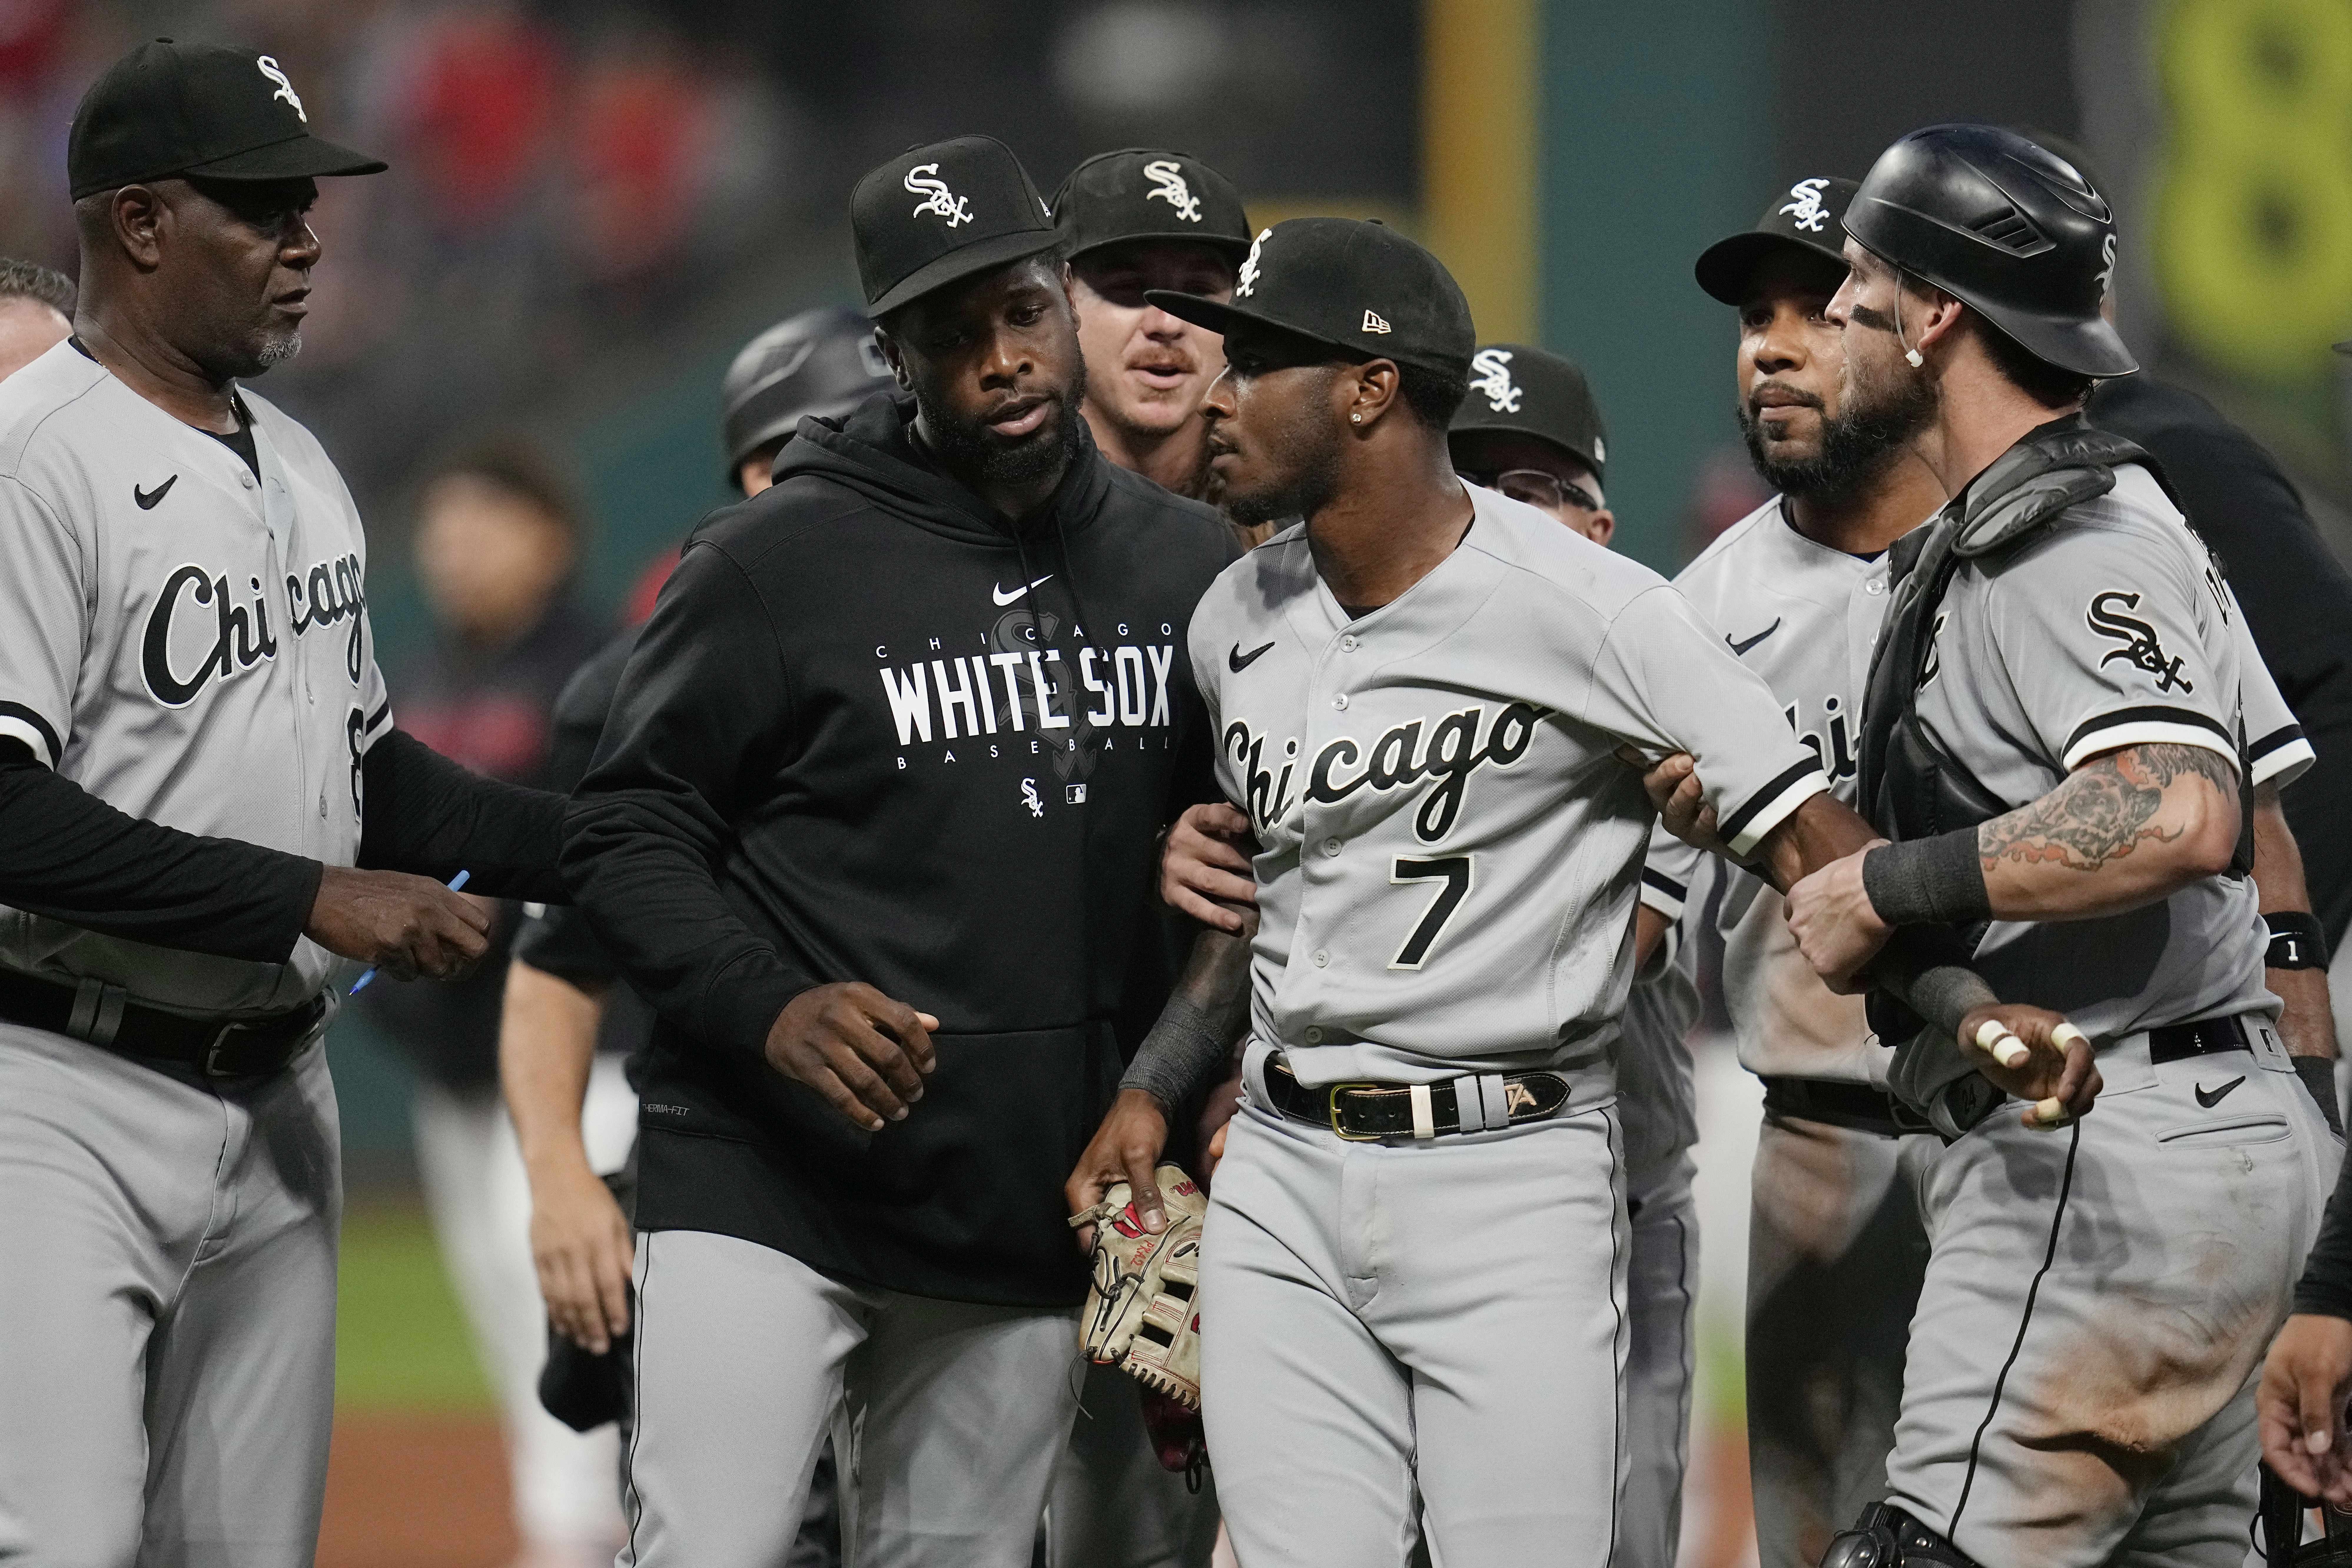 Cleveland Guardians vs Chicago White Sox: Who won Guardians or Chicago  White Sox